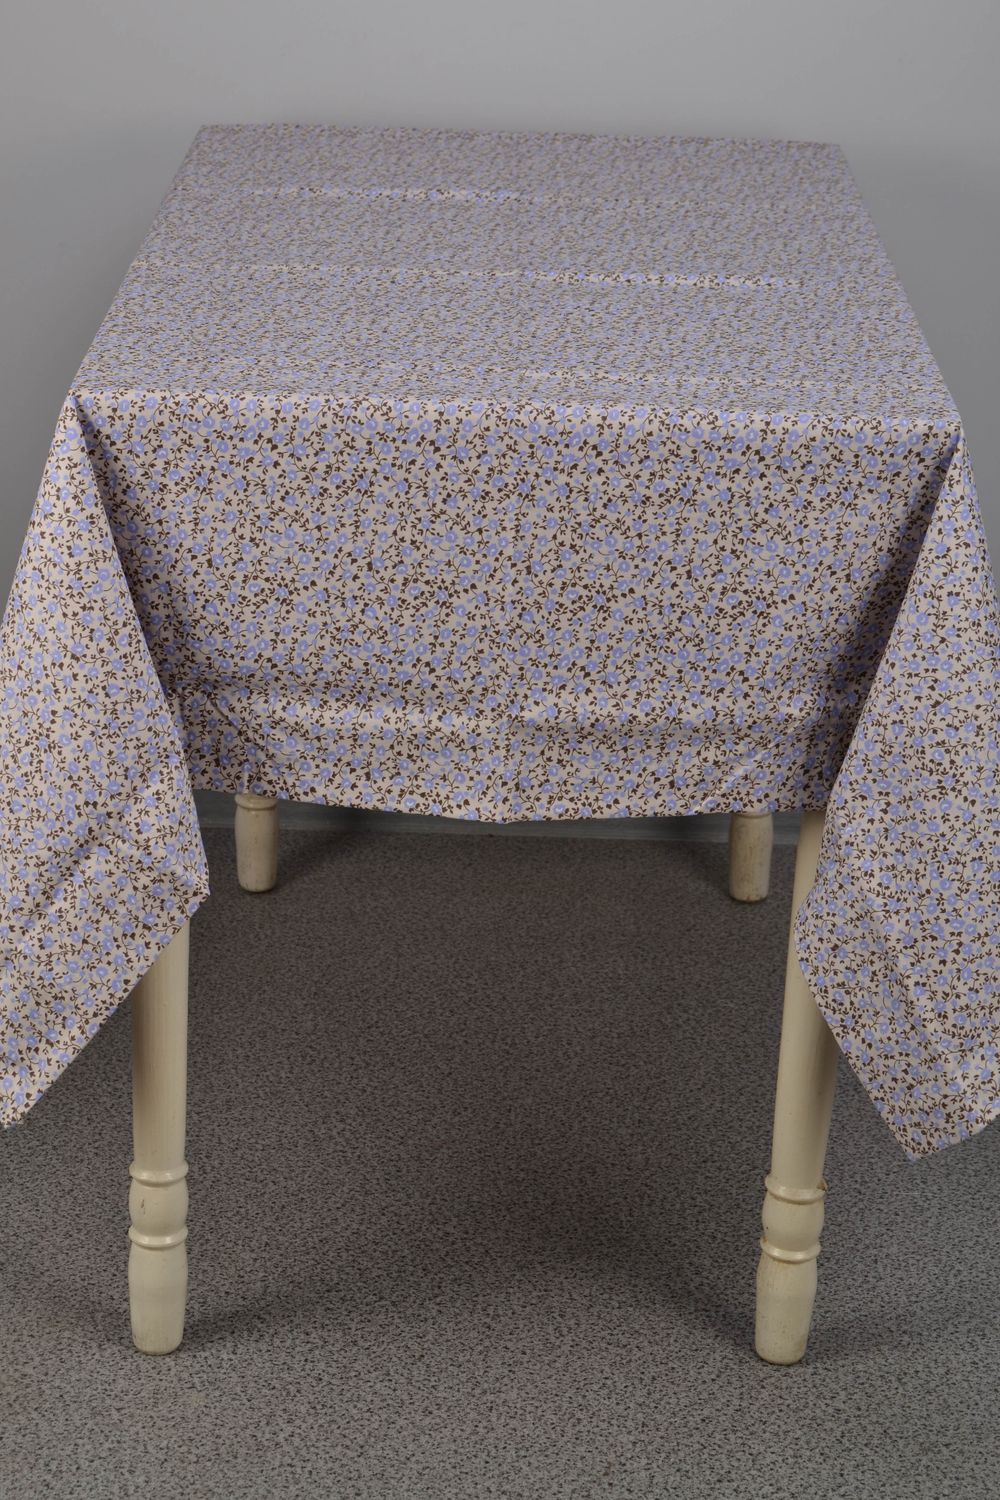 Large tablecloth with lavender print photo 2